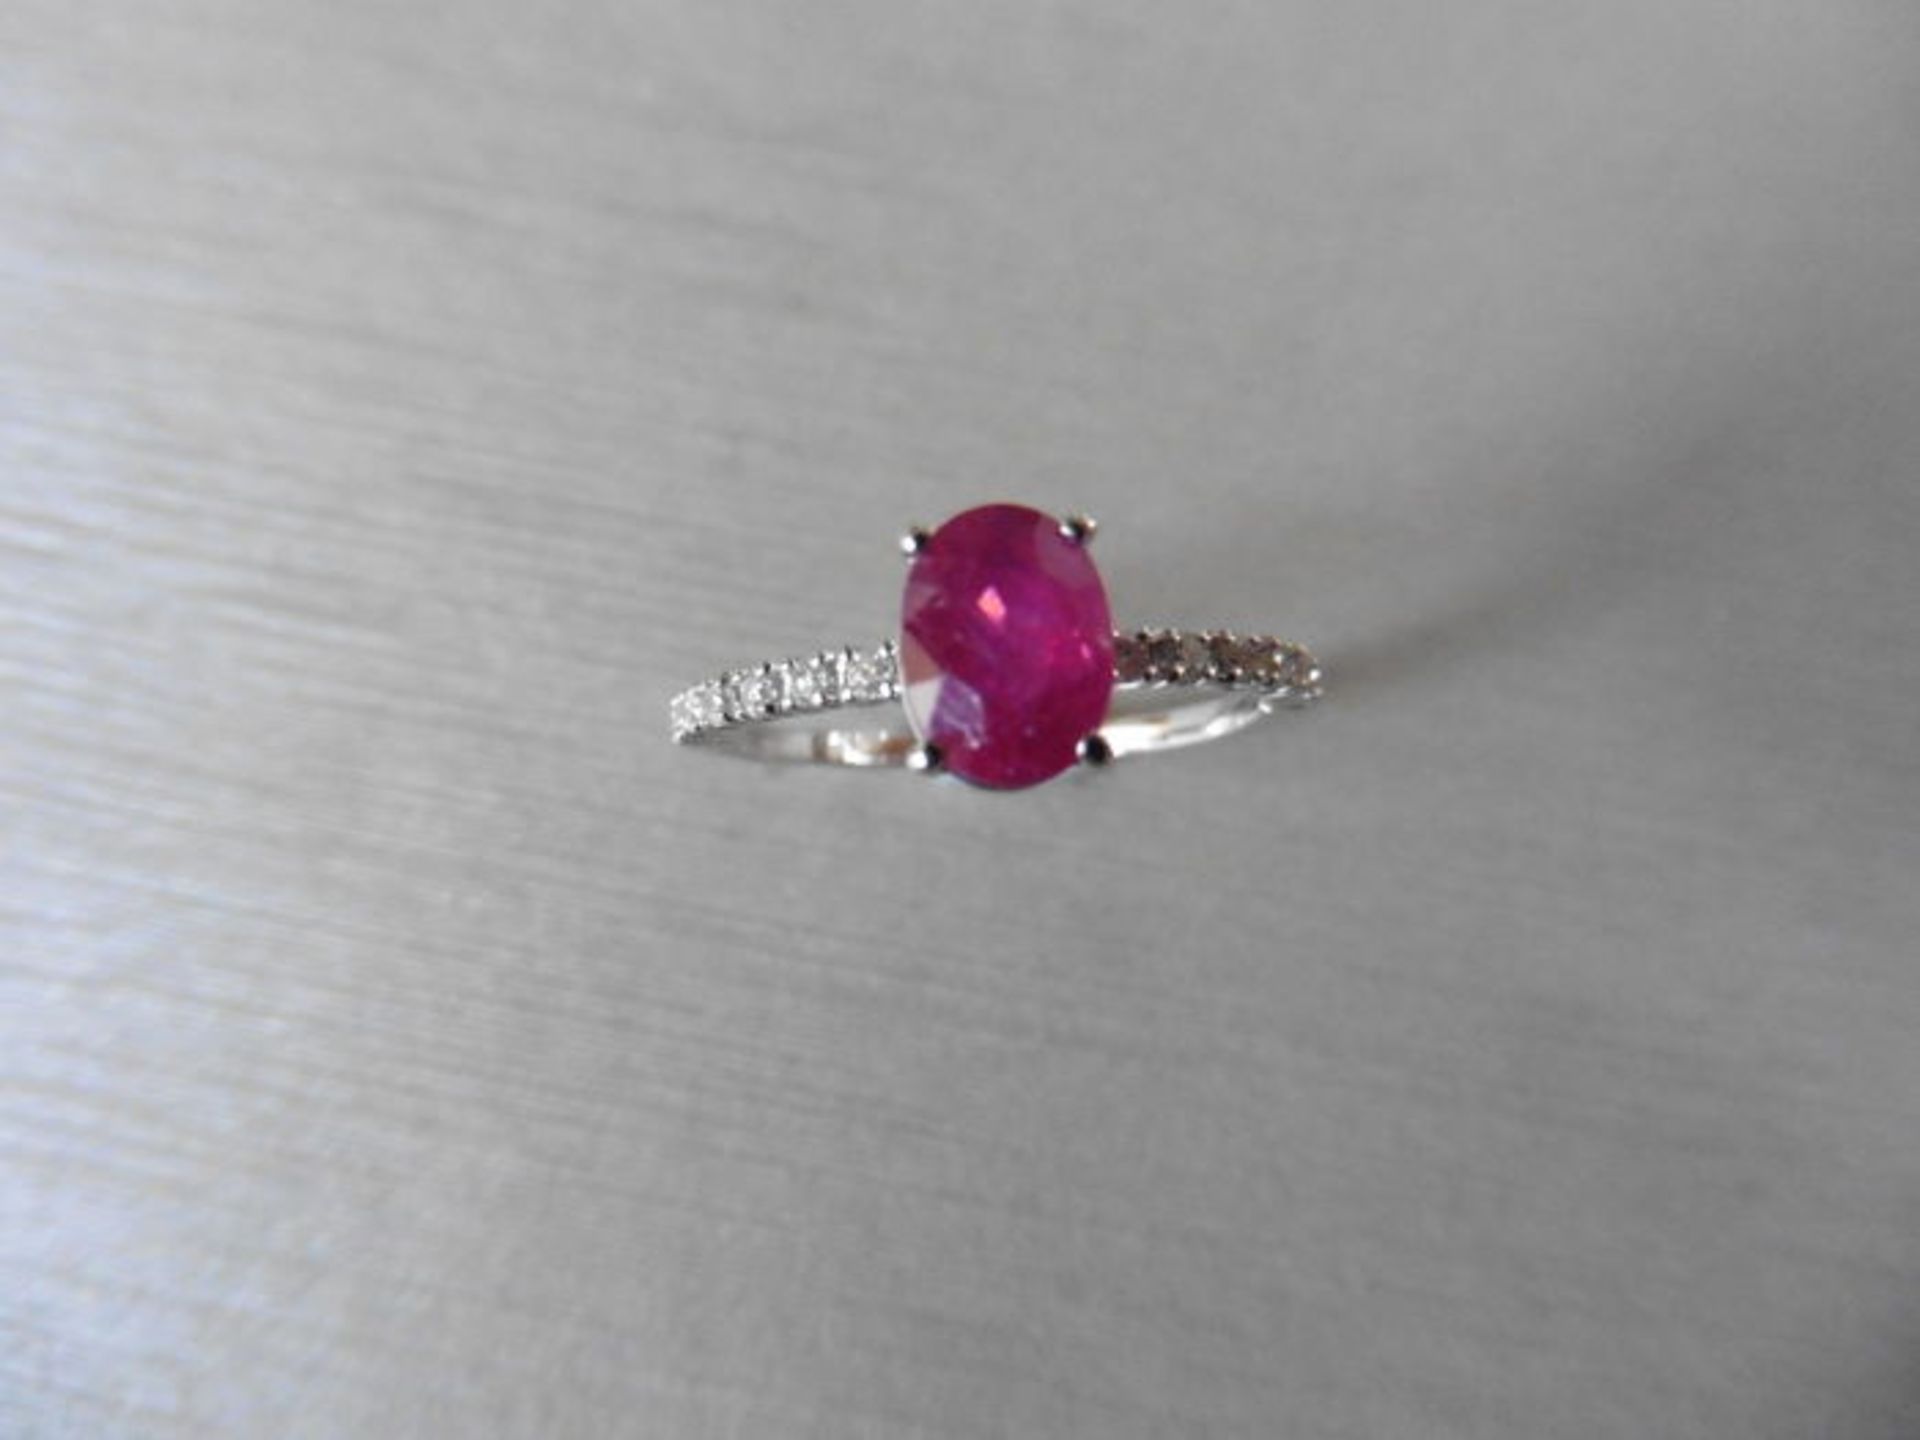 0.80ct / 0.12ct ruby and diamond dress ring. Oval cut ( glass filled) ruby with small diamonds set